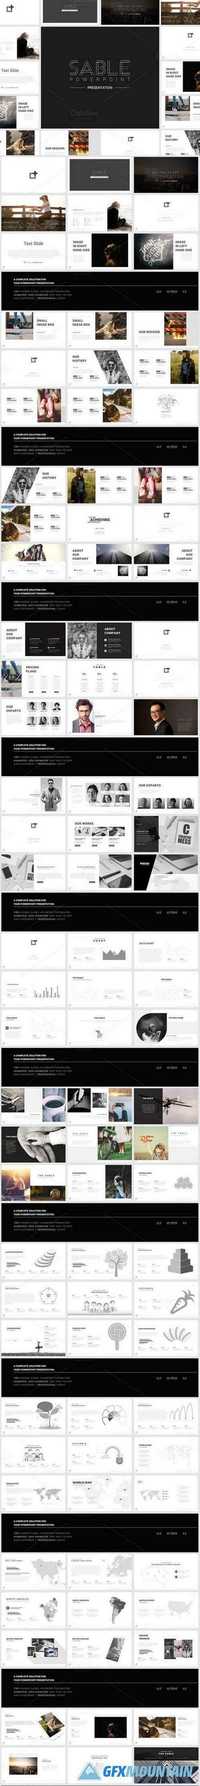 Sable Powerpoint Template 897253